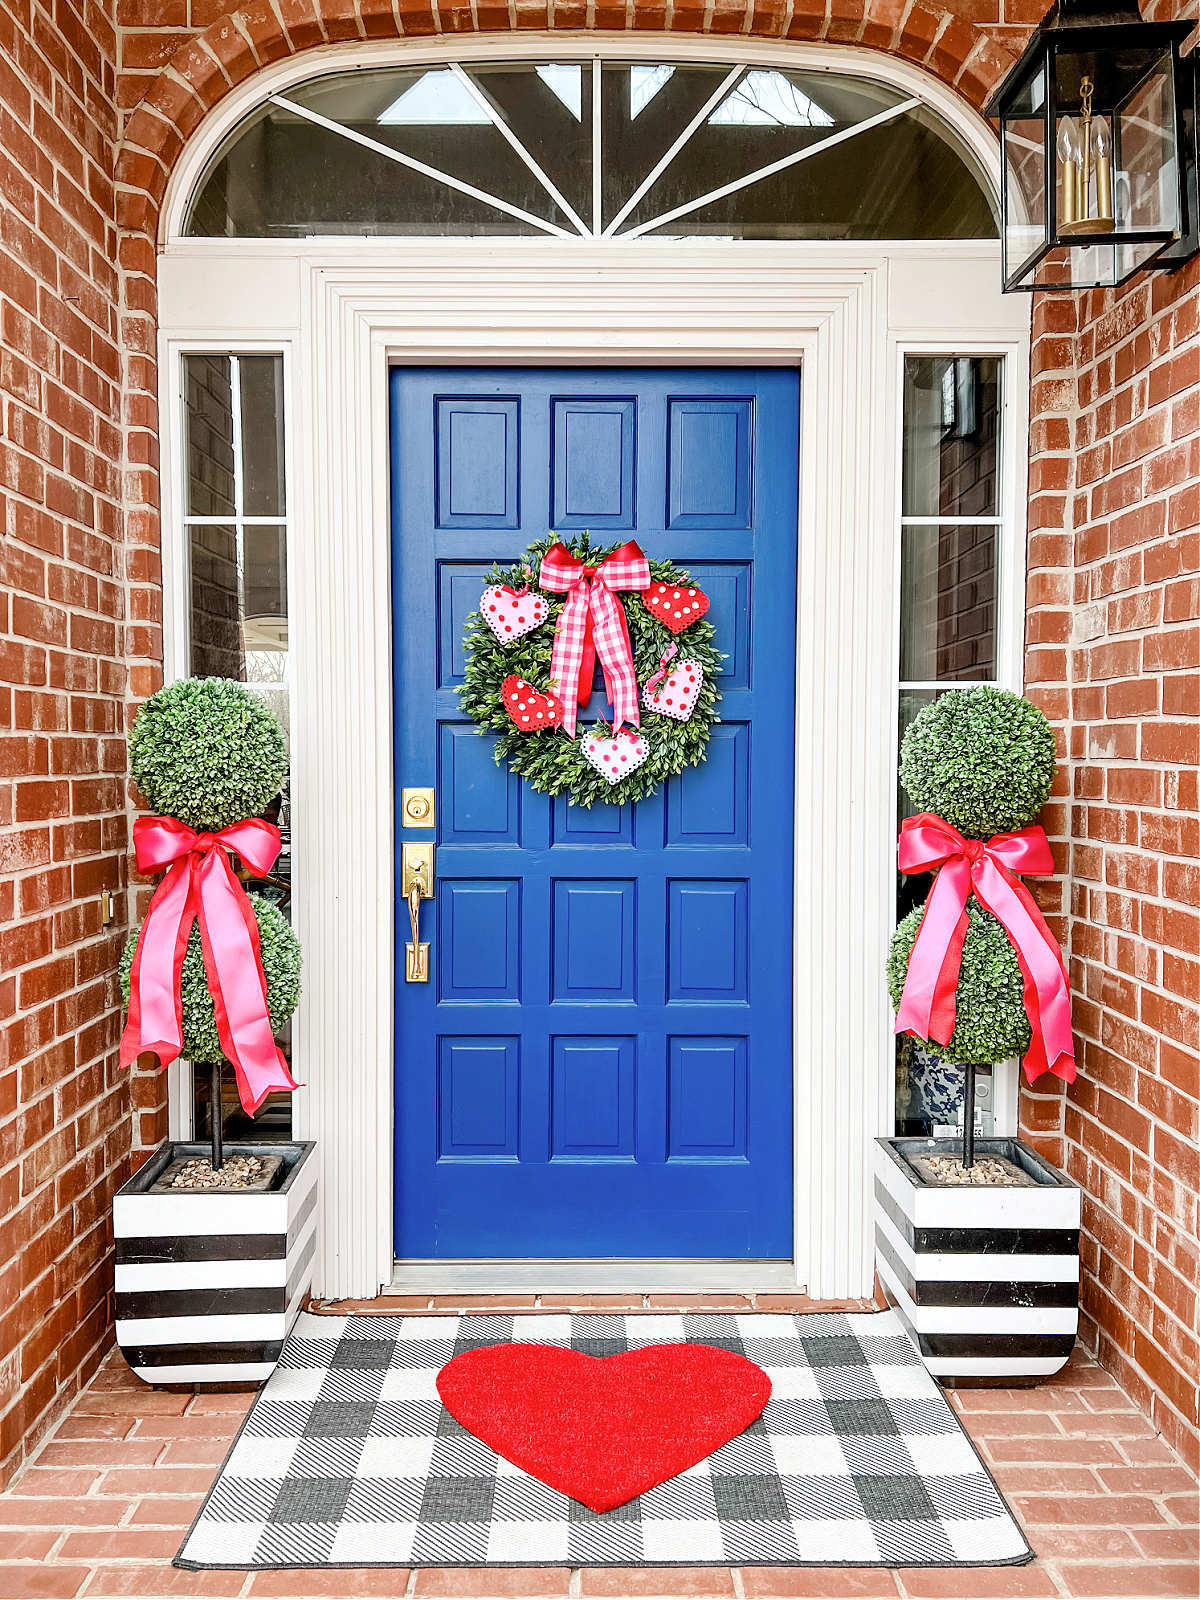 Valentine's Day decorations for front porch- faux boxwood topiaries and heart doormat rug with heart wreath